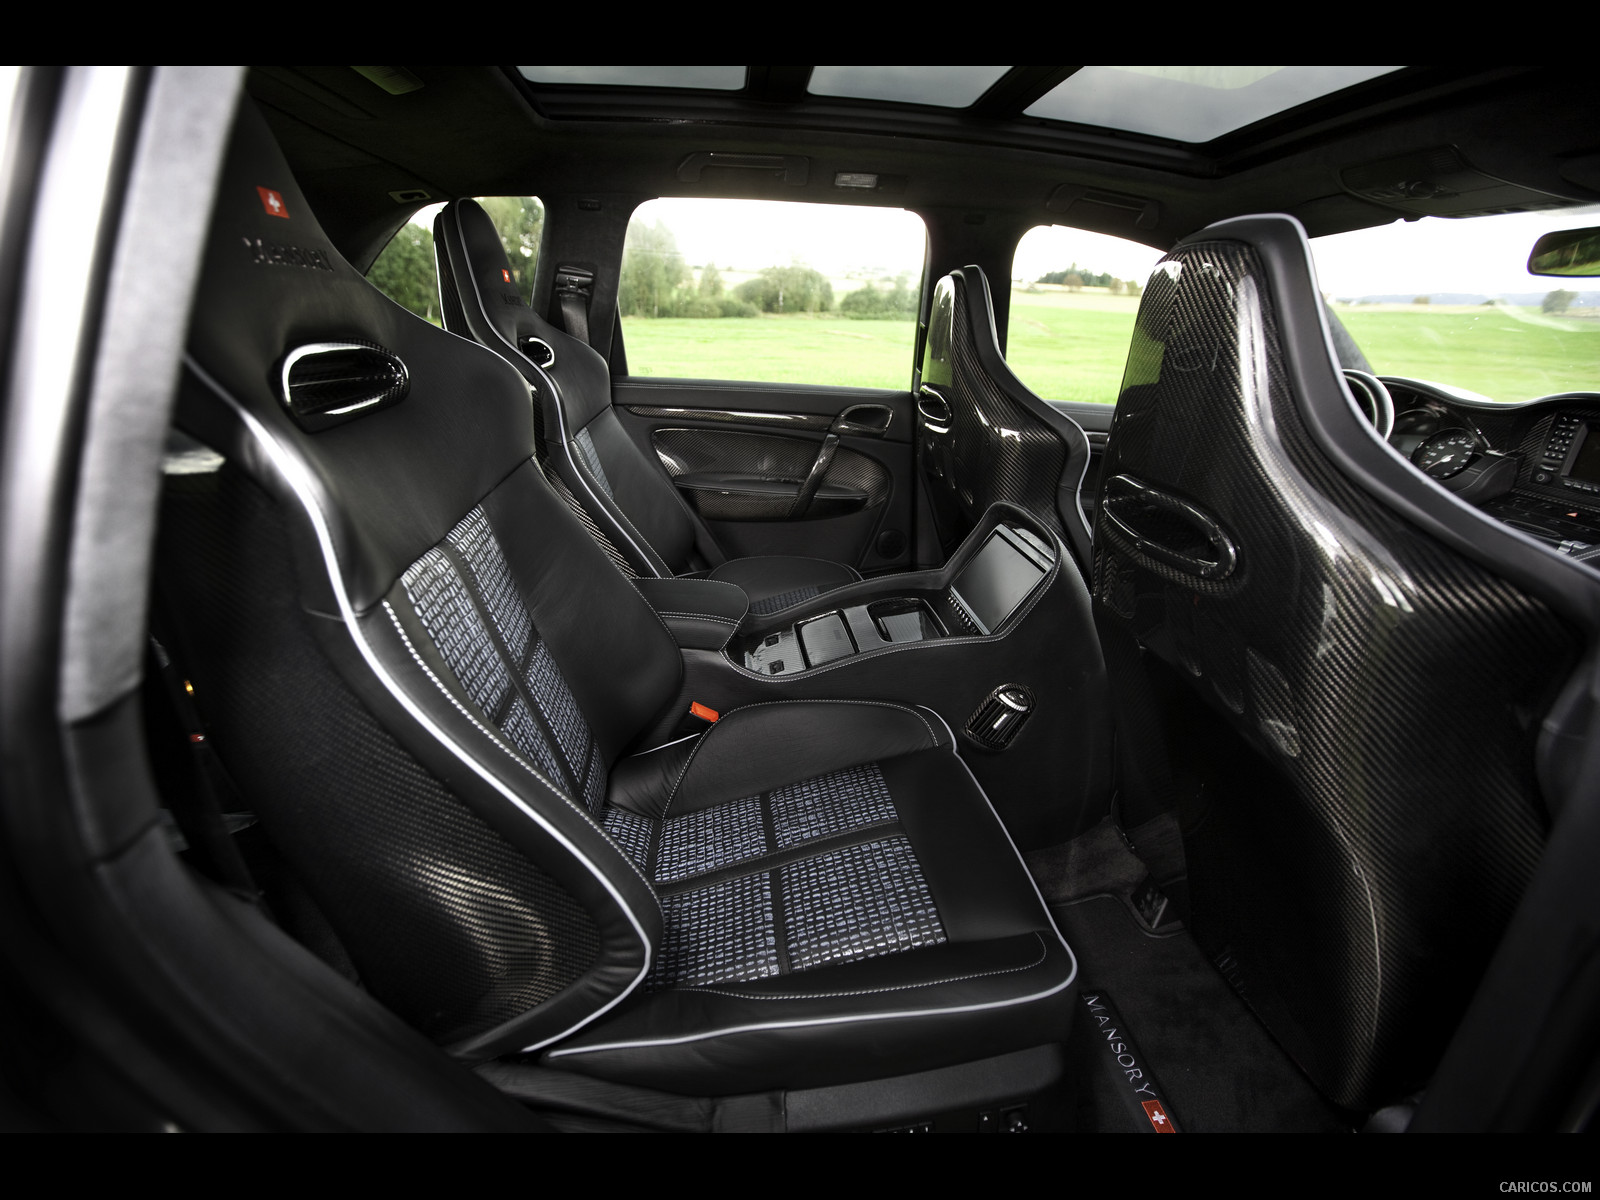 2009 Mansory Chopster based on Porsche Cayenne Turbo S  - Interior, #32 of 38